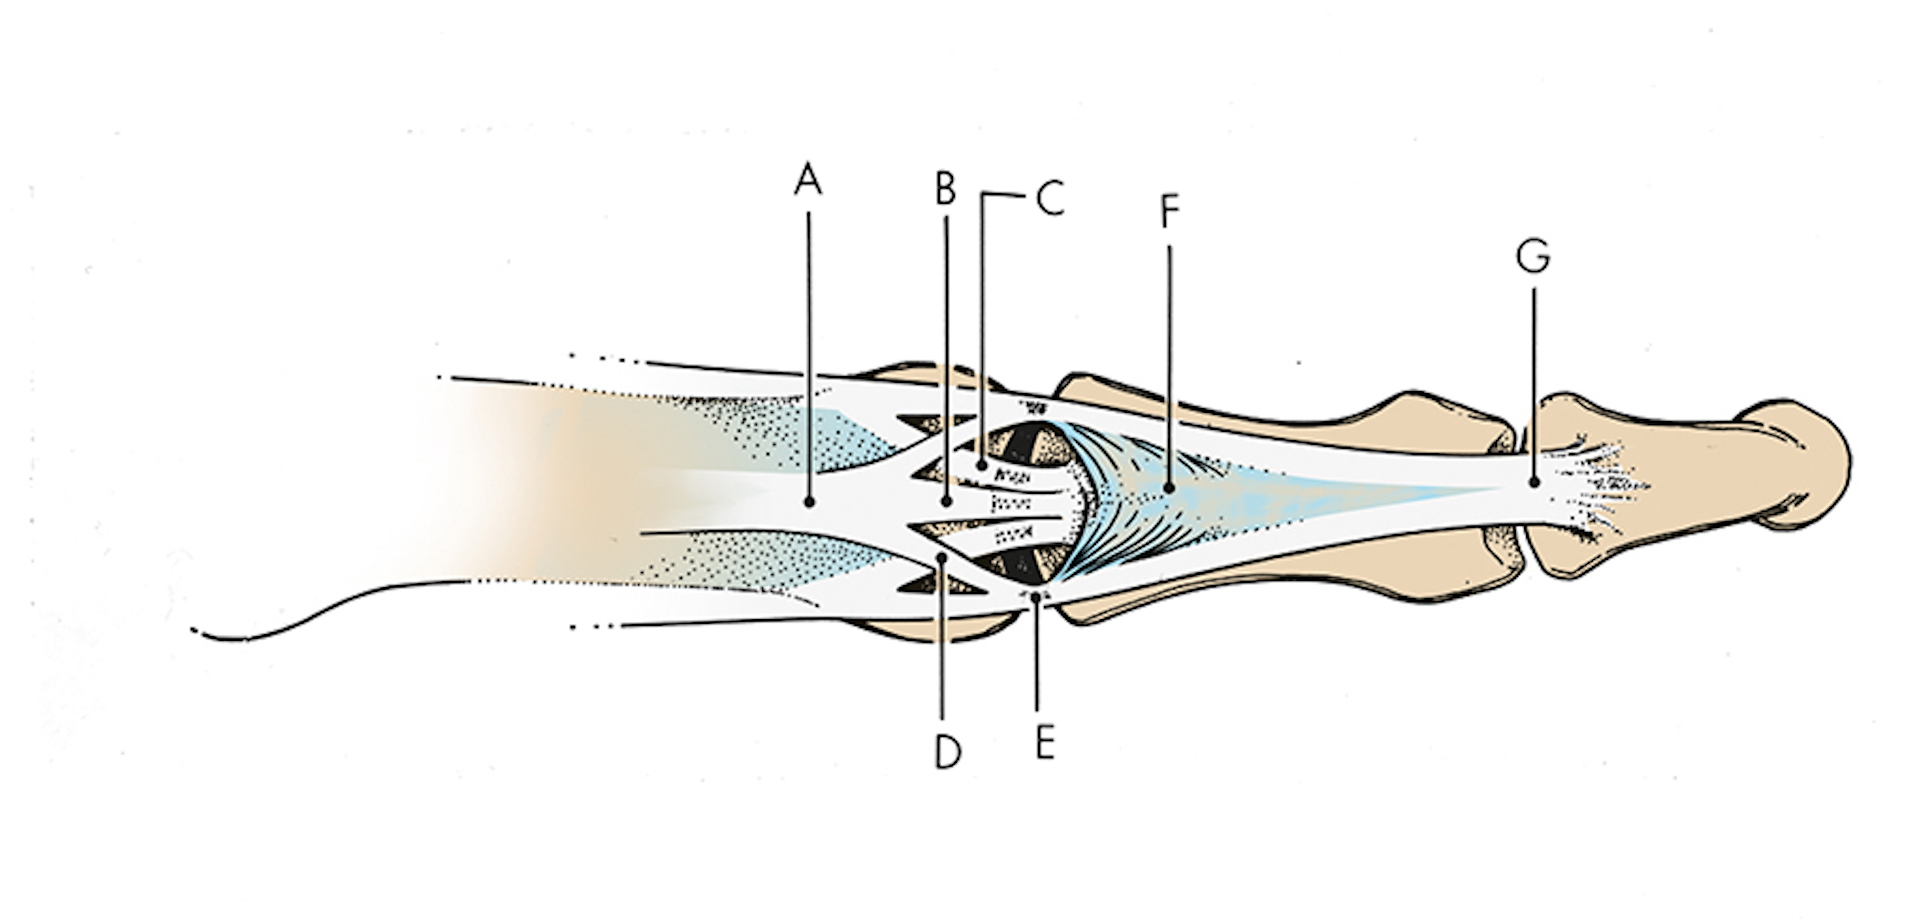 Finger extensor tendon anatomy dorsal view: A. Extensor tendon; B. Central slip; C. Oblique fibers of the dorsal aponeurosis; D. Lateral slip; E. Conjoined lateral band; F. Triangular ligament; G. Terminal extensor tendon